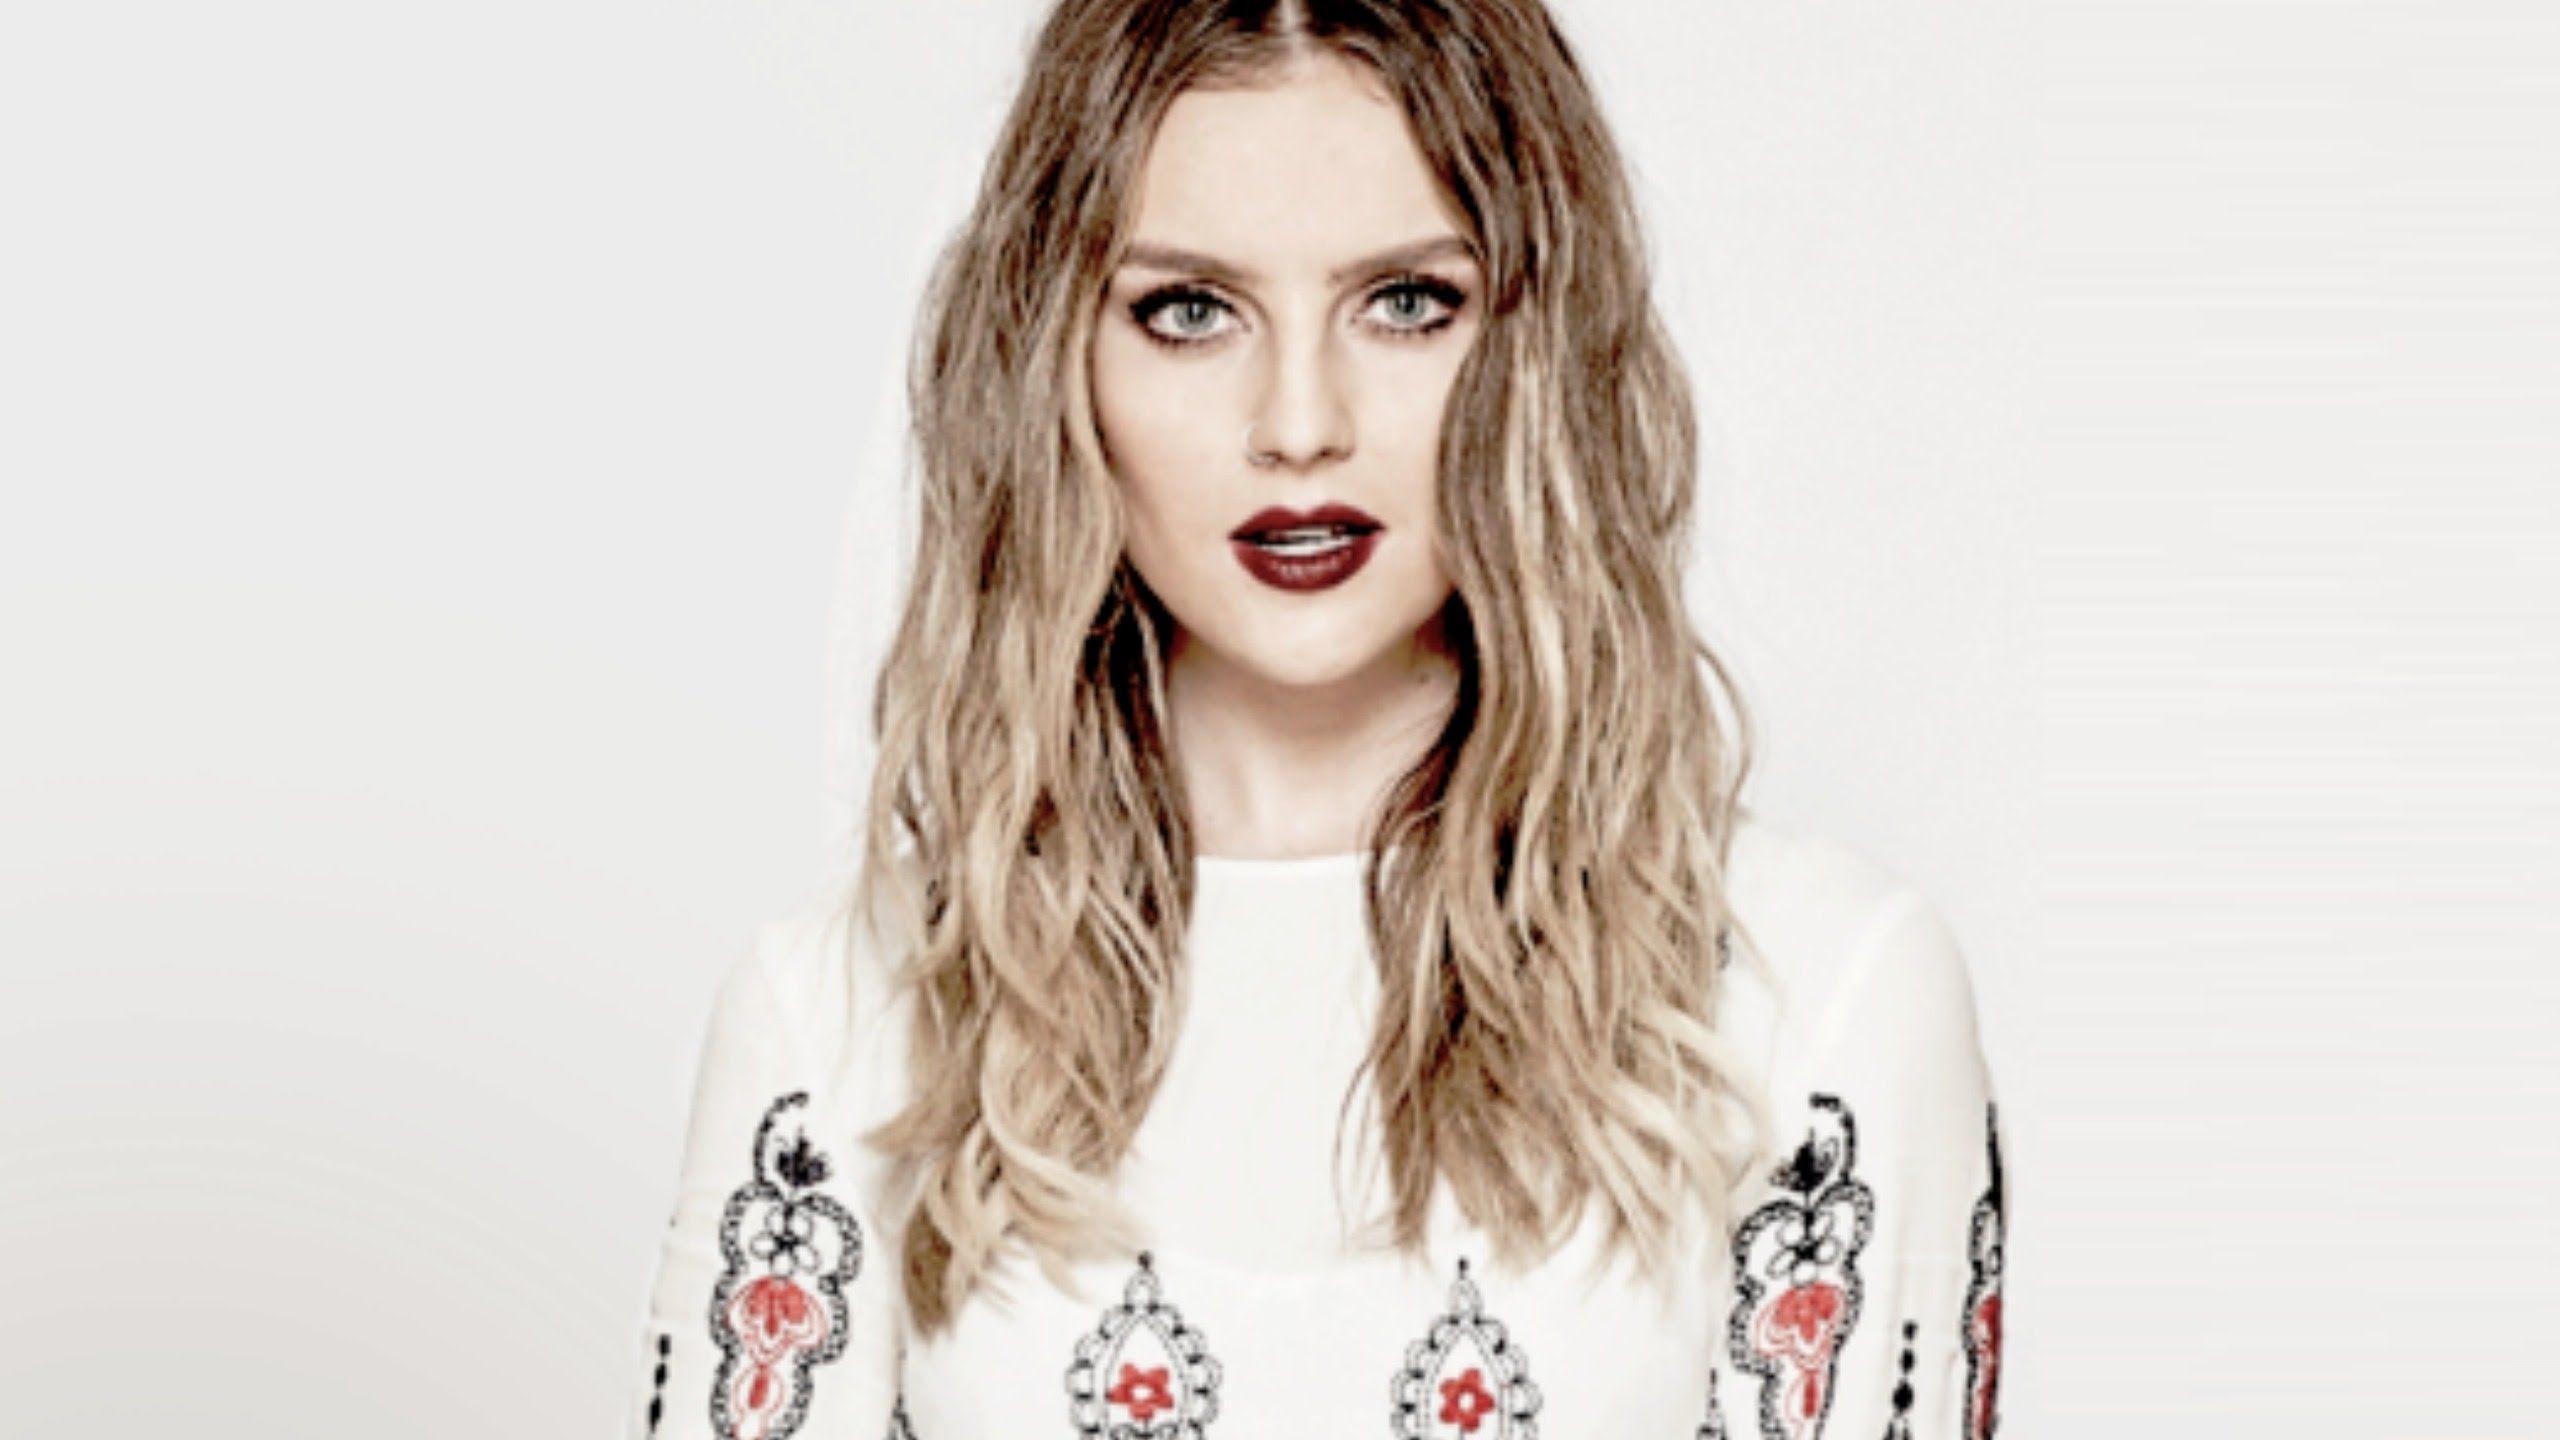 Perrie Edwards Wallpapers - Wallpaper Cave